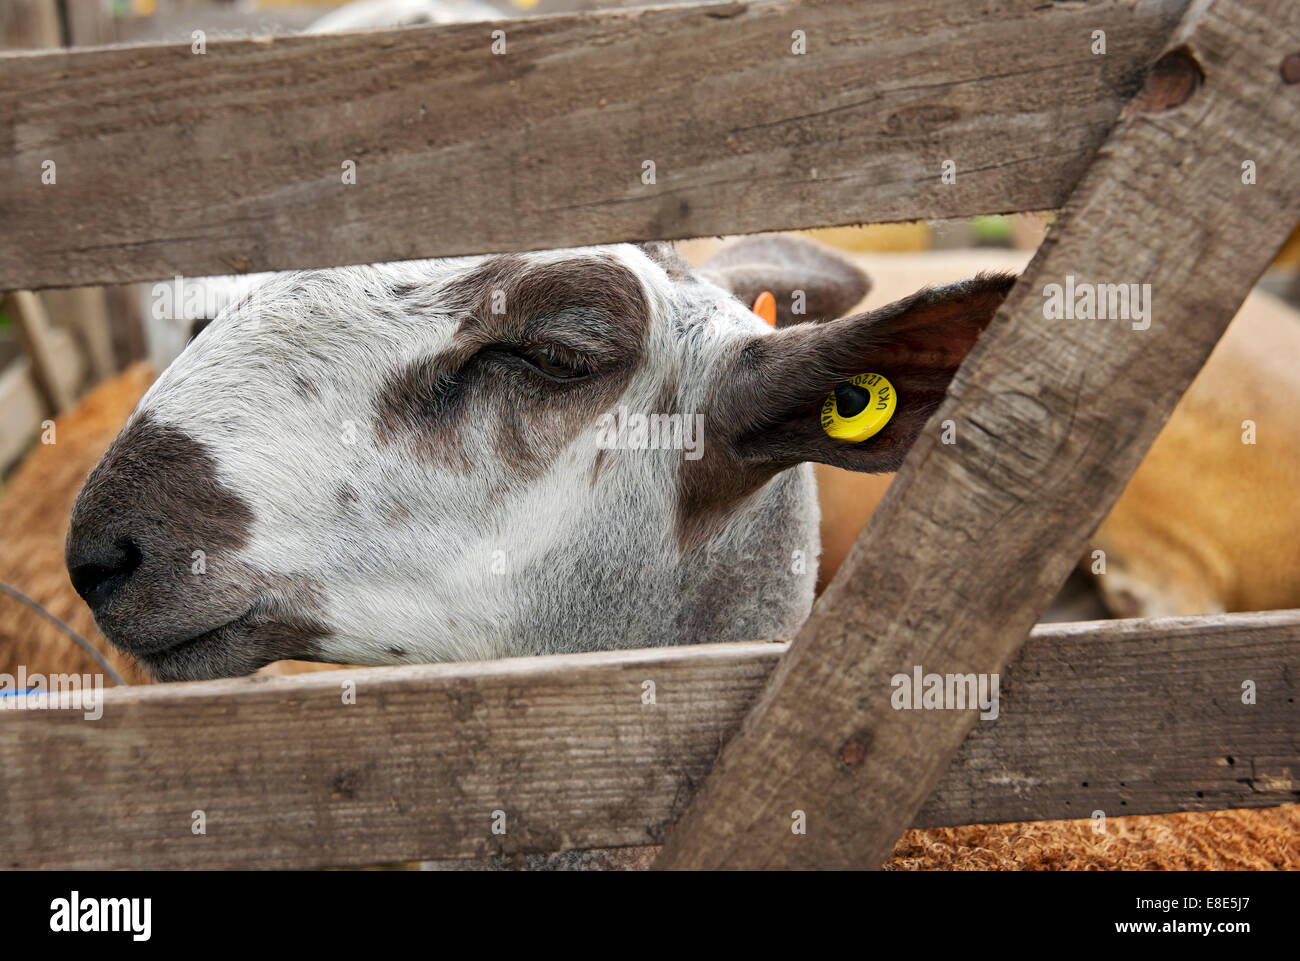 Close up of sheep in pen on a farm England UK United Kingdom GB Great Britain Stock Photo